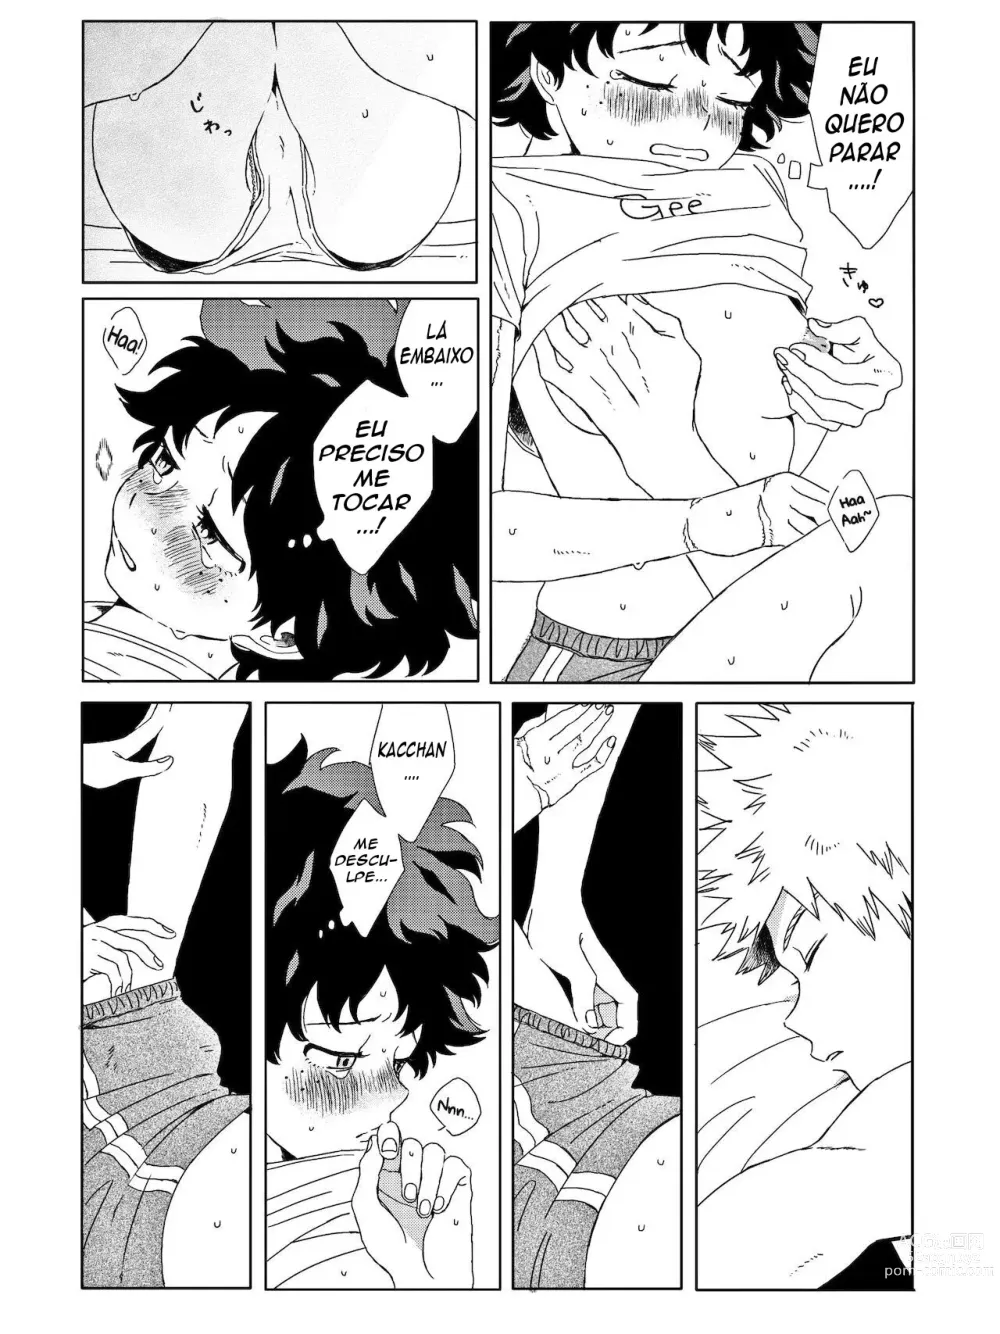 Page 8 of doujinshi The Thin Line Between Masturbation and Doing It [SpookyLatte] PT-BR